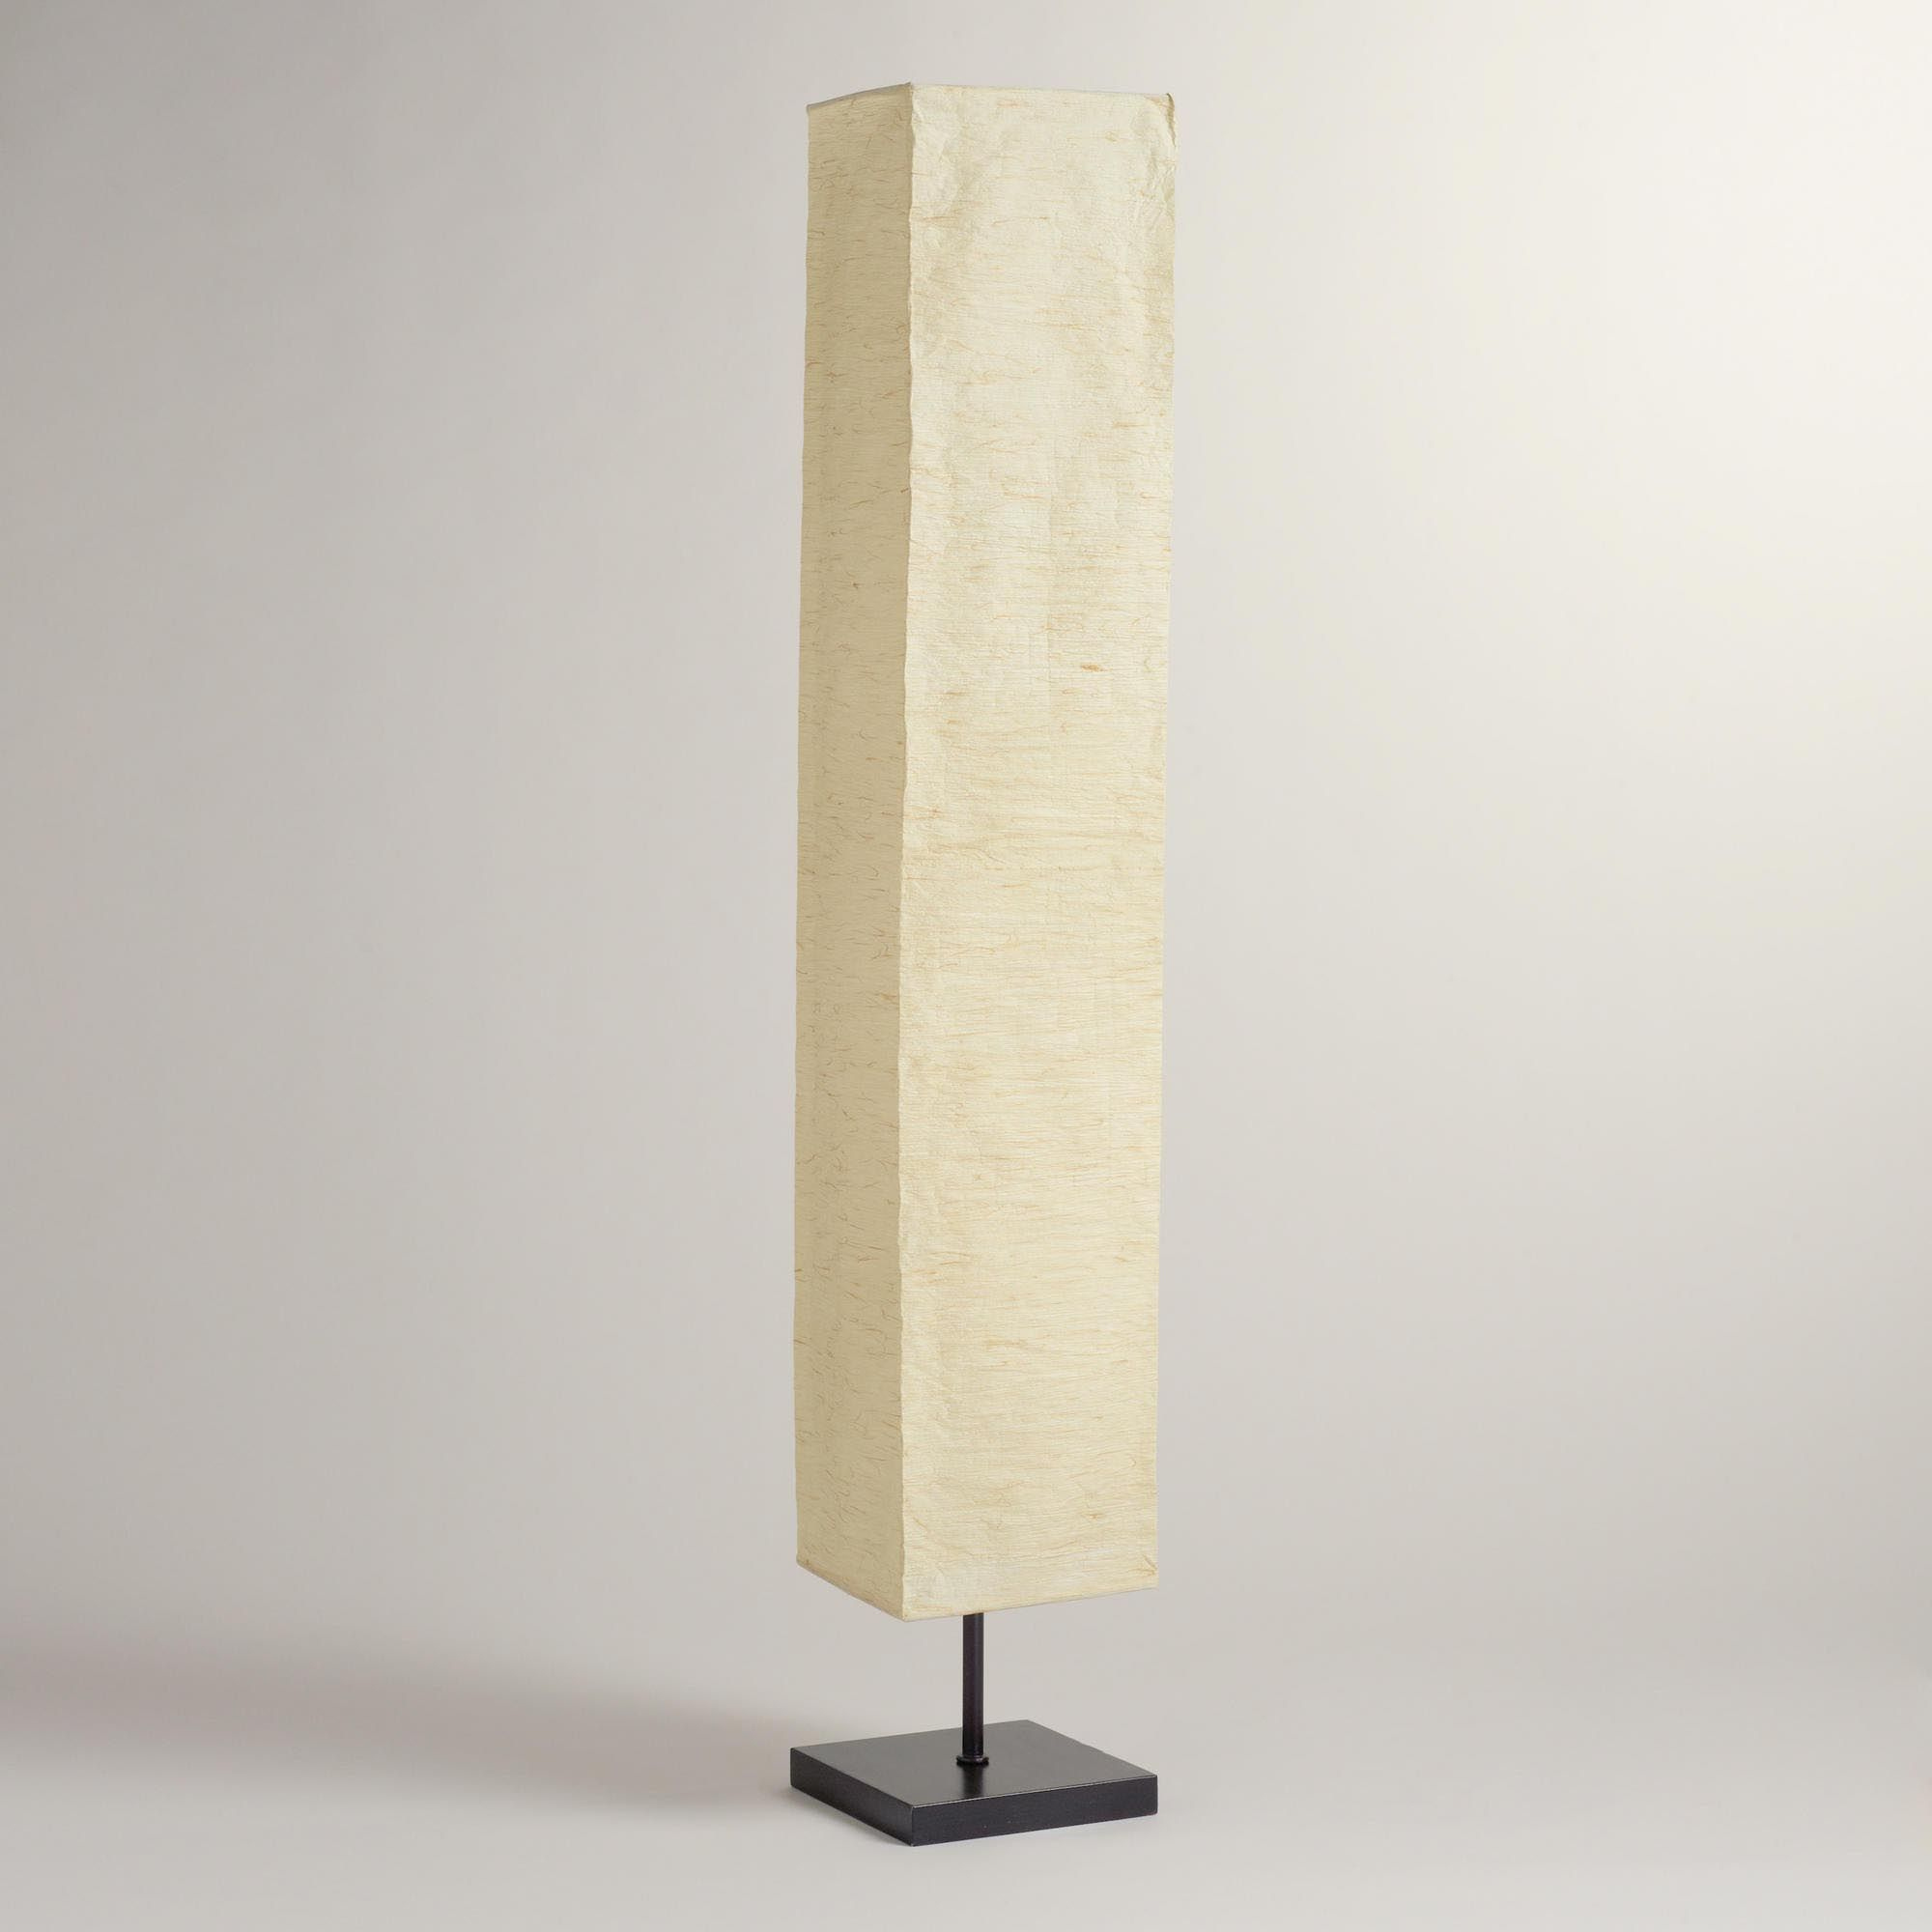 Japanese Paper Floor Lamps Paper Floor Lamp Chinese Paper intended for size 2000 X 2000